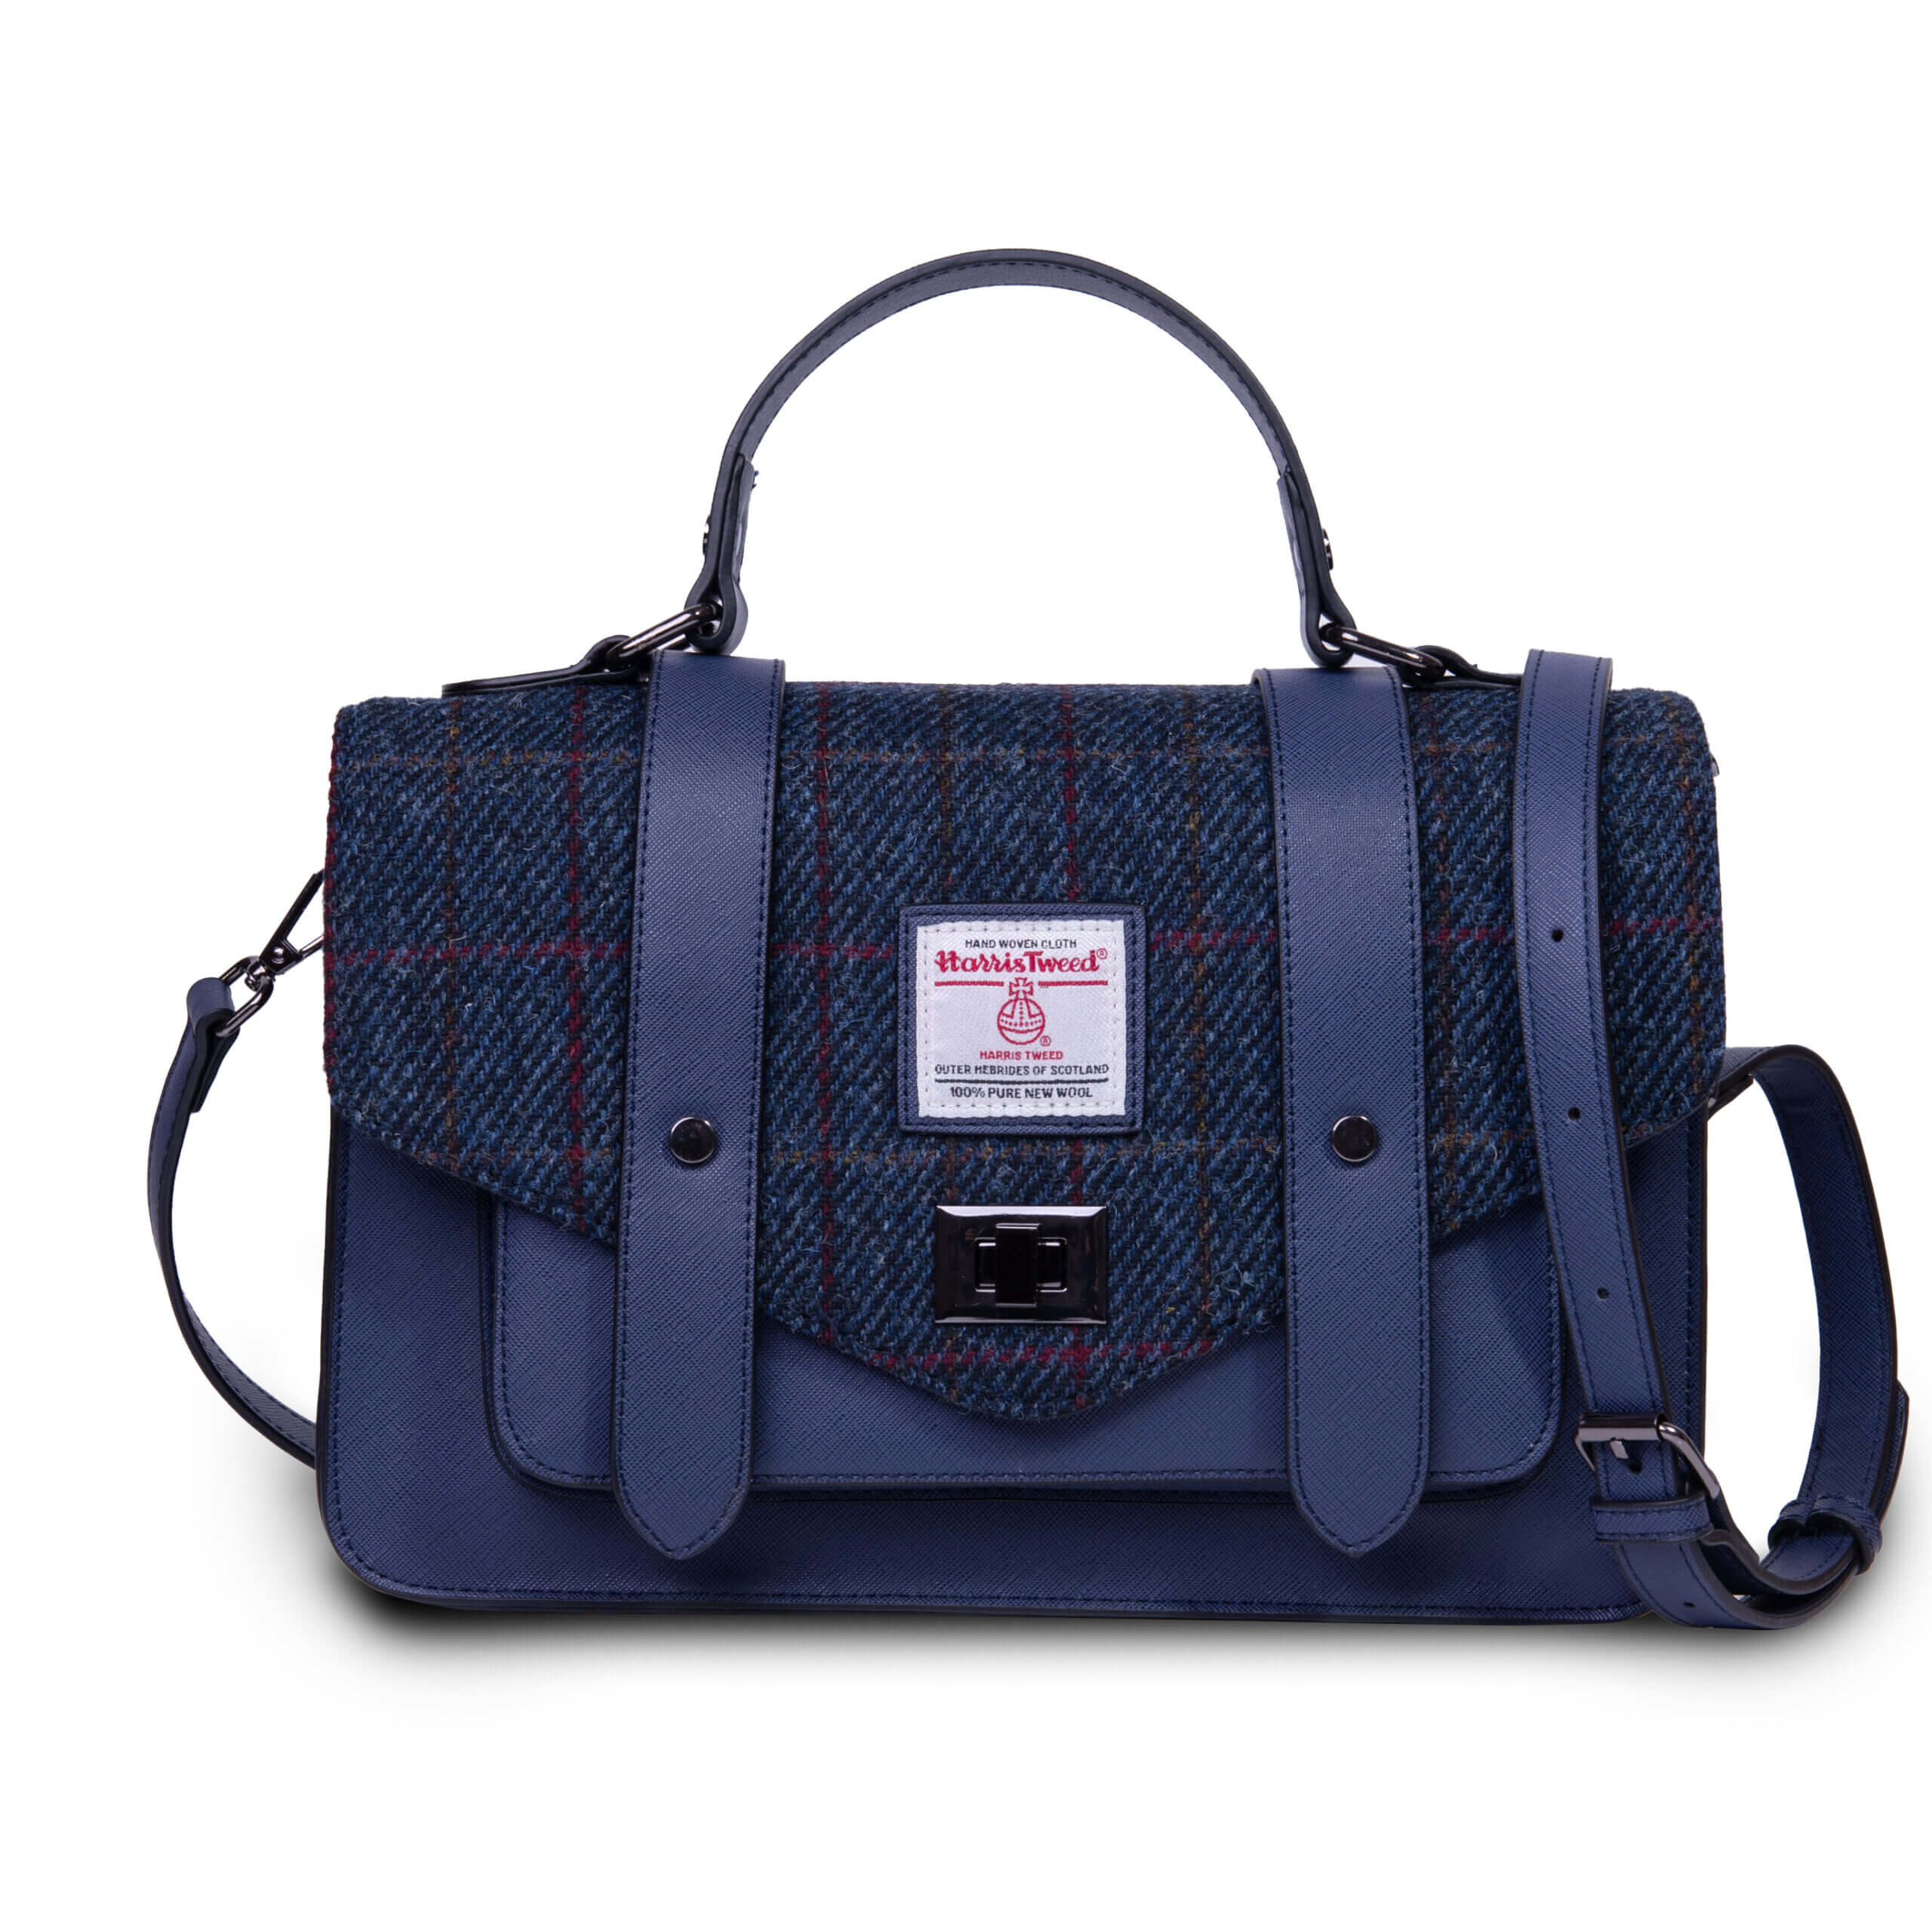 Image of Navy Over-Check Satchels with Harris Tweed® | Size: Mini (21 cm x 16 cm)